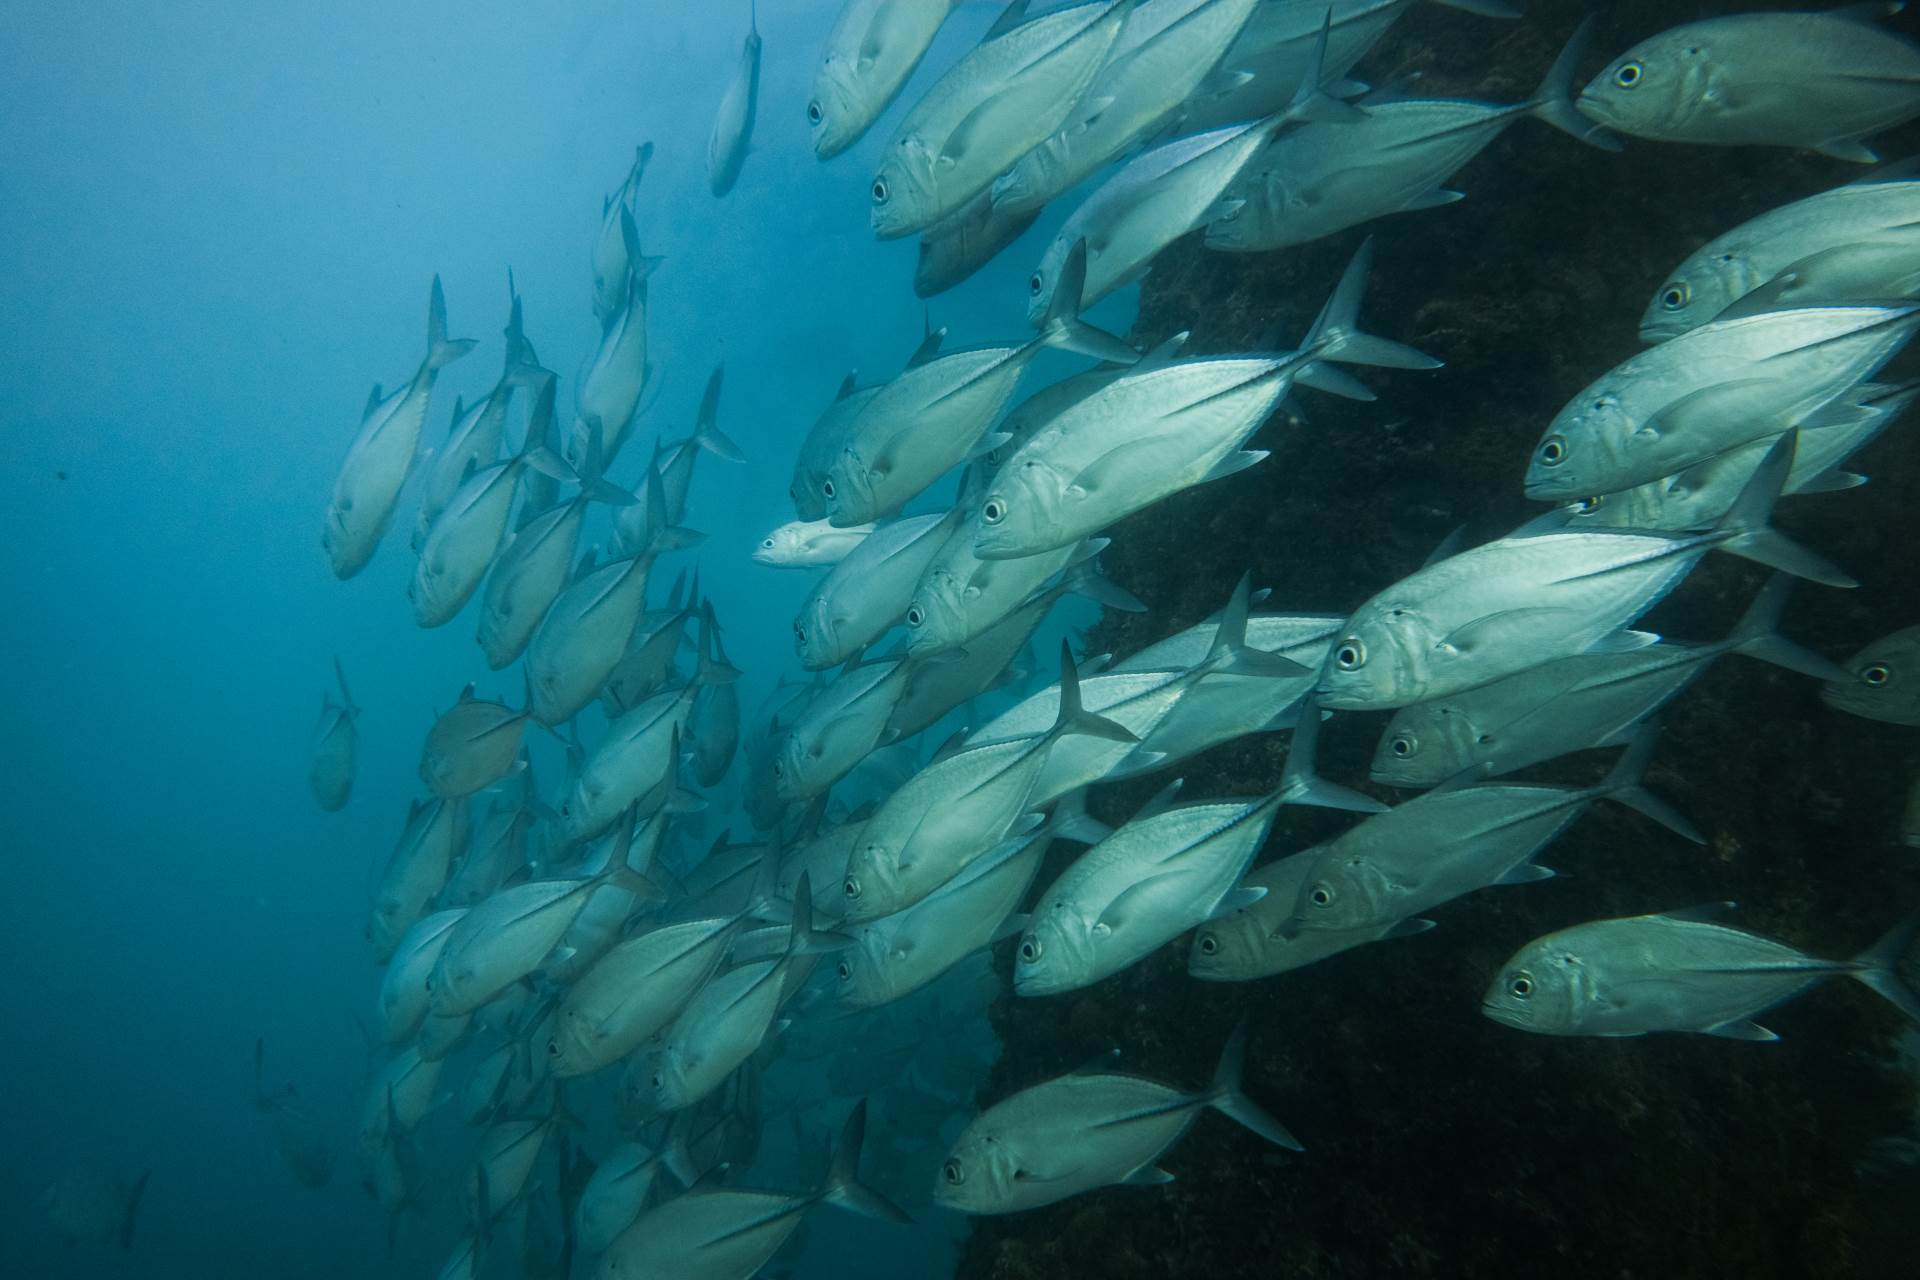 Bigeye trevally swarm around Navy Pier's pilings in Exmouth, Western Australia. These fish are a common sight in the tropical Indo-Pacific region, and they congregate in huge schools, numbering in the thousands. At Navy Pier, due to the lack of fishing, they are particularly numerous. In fact, because of the lack of fishing pressures, most fish species at Navy Pier are more numerous than they are elsewhere.